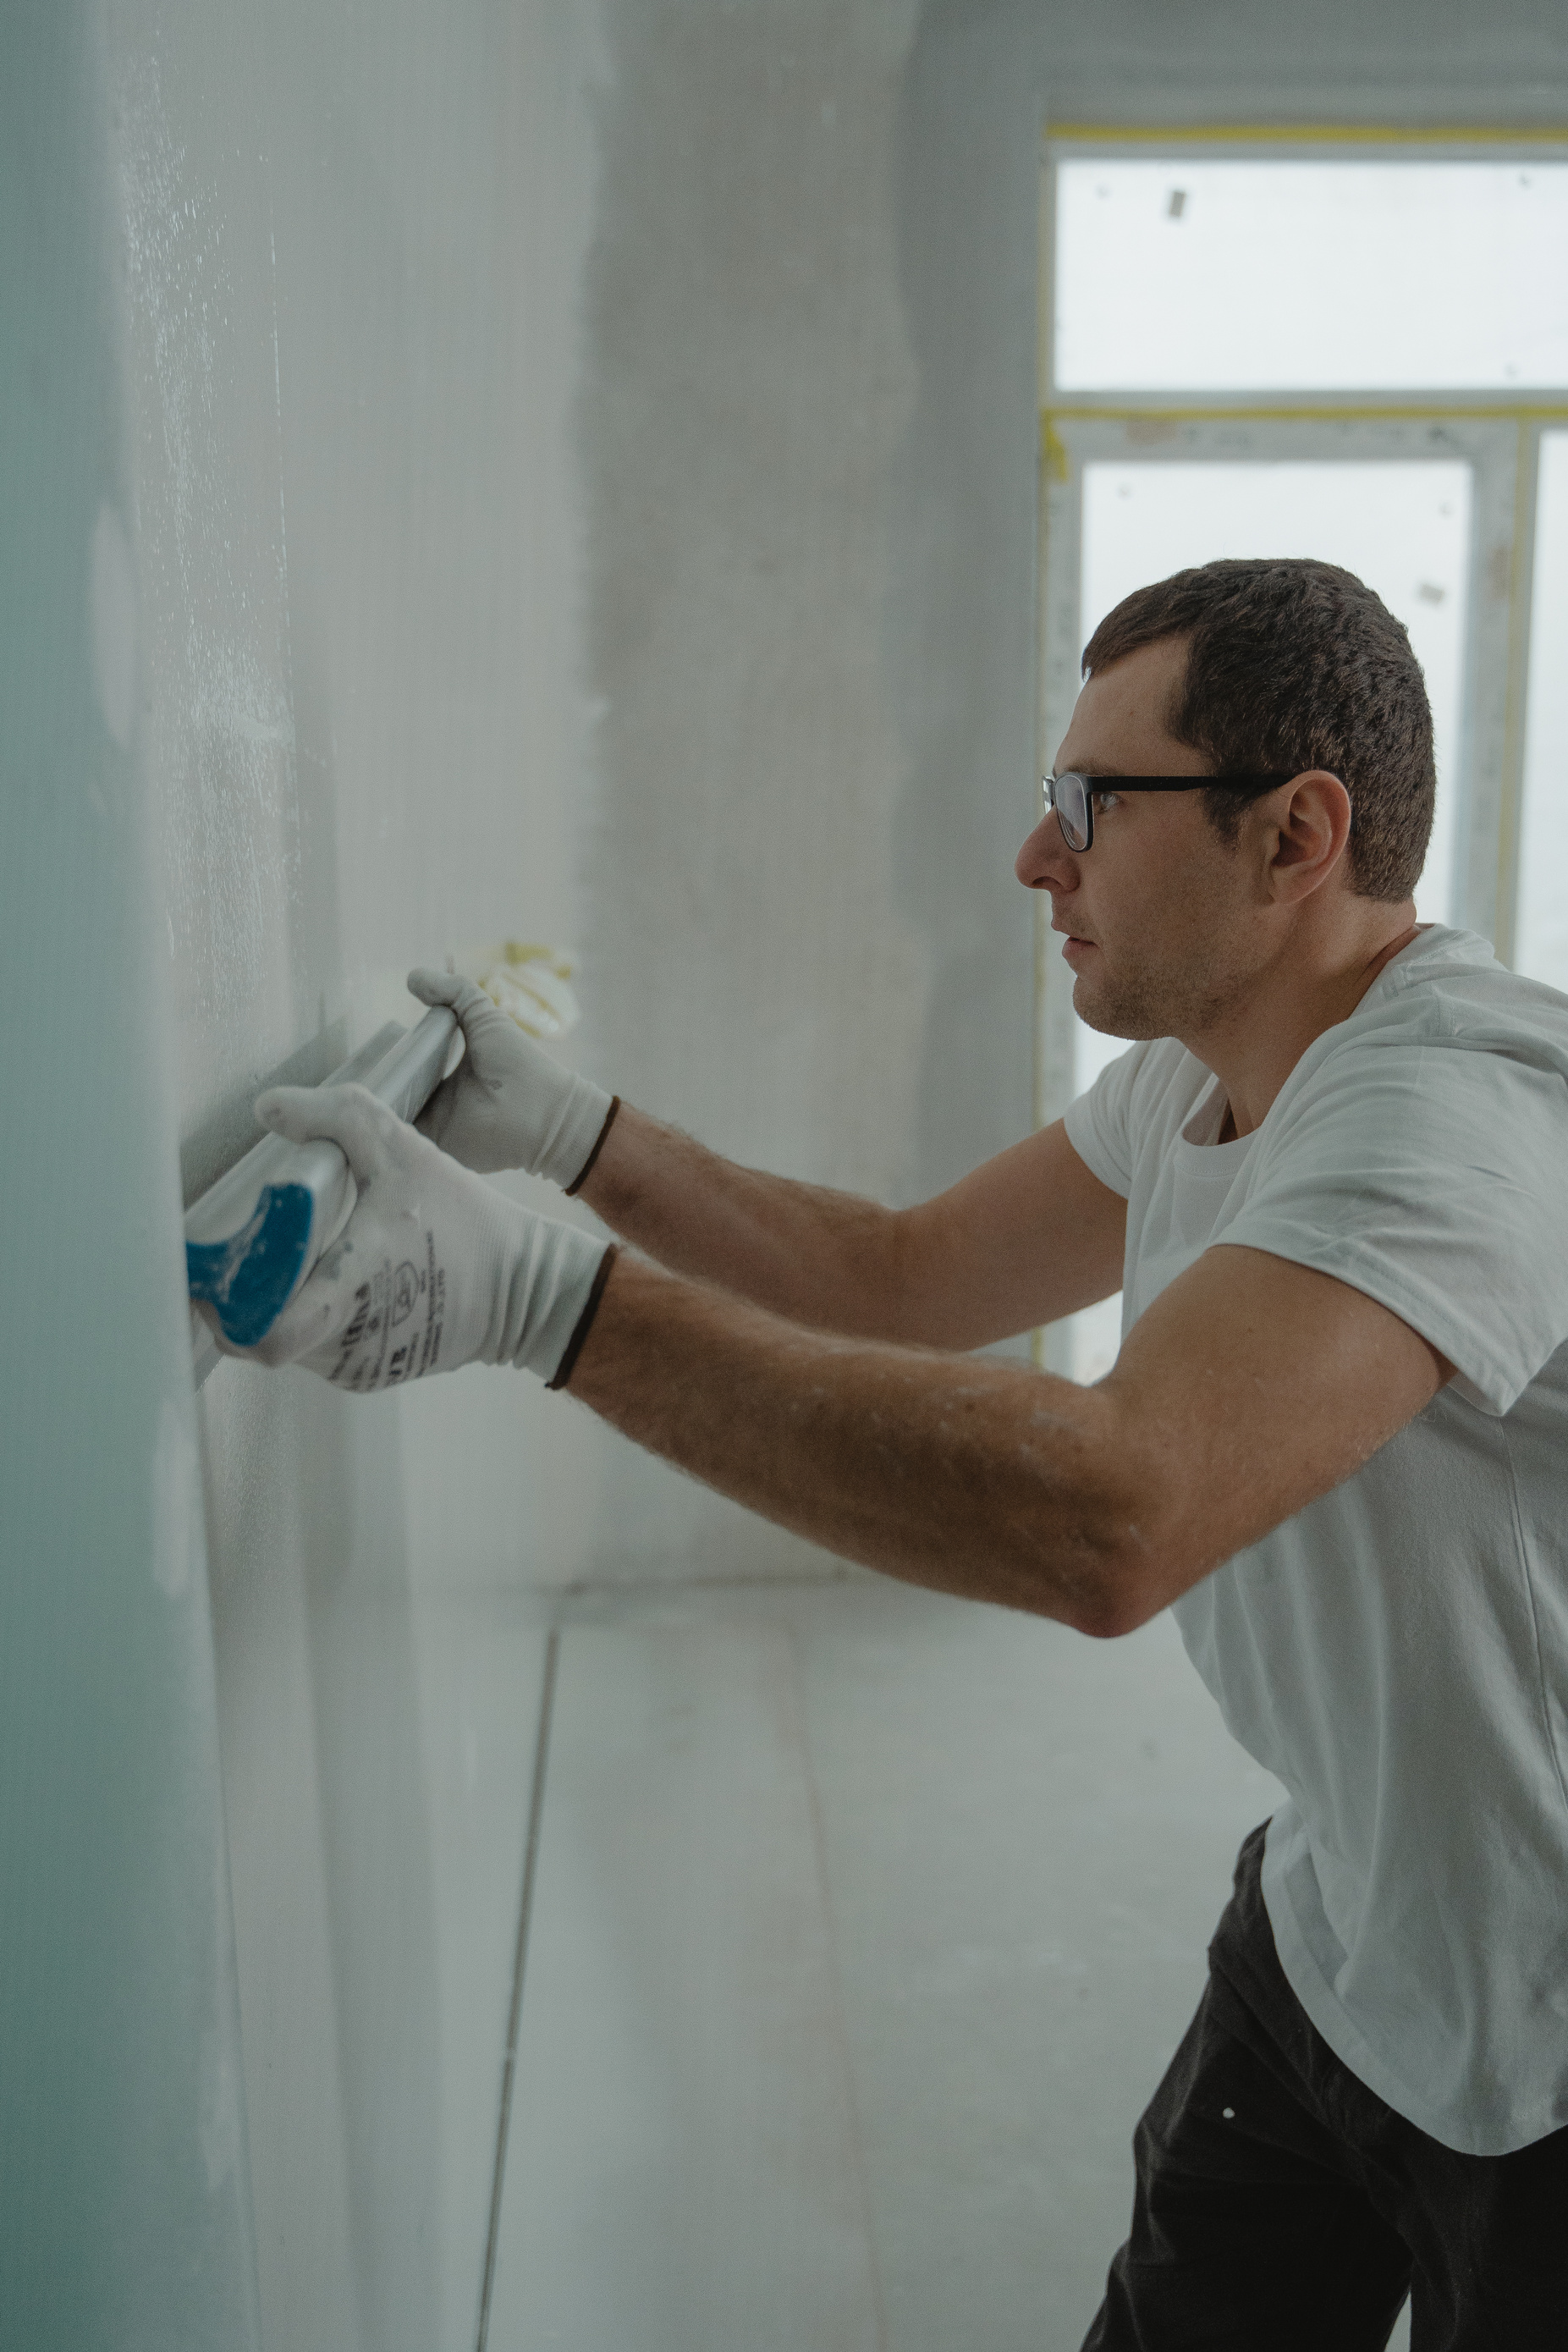 A Man in White Shirt Painting a House